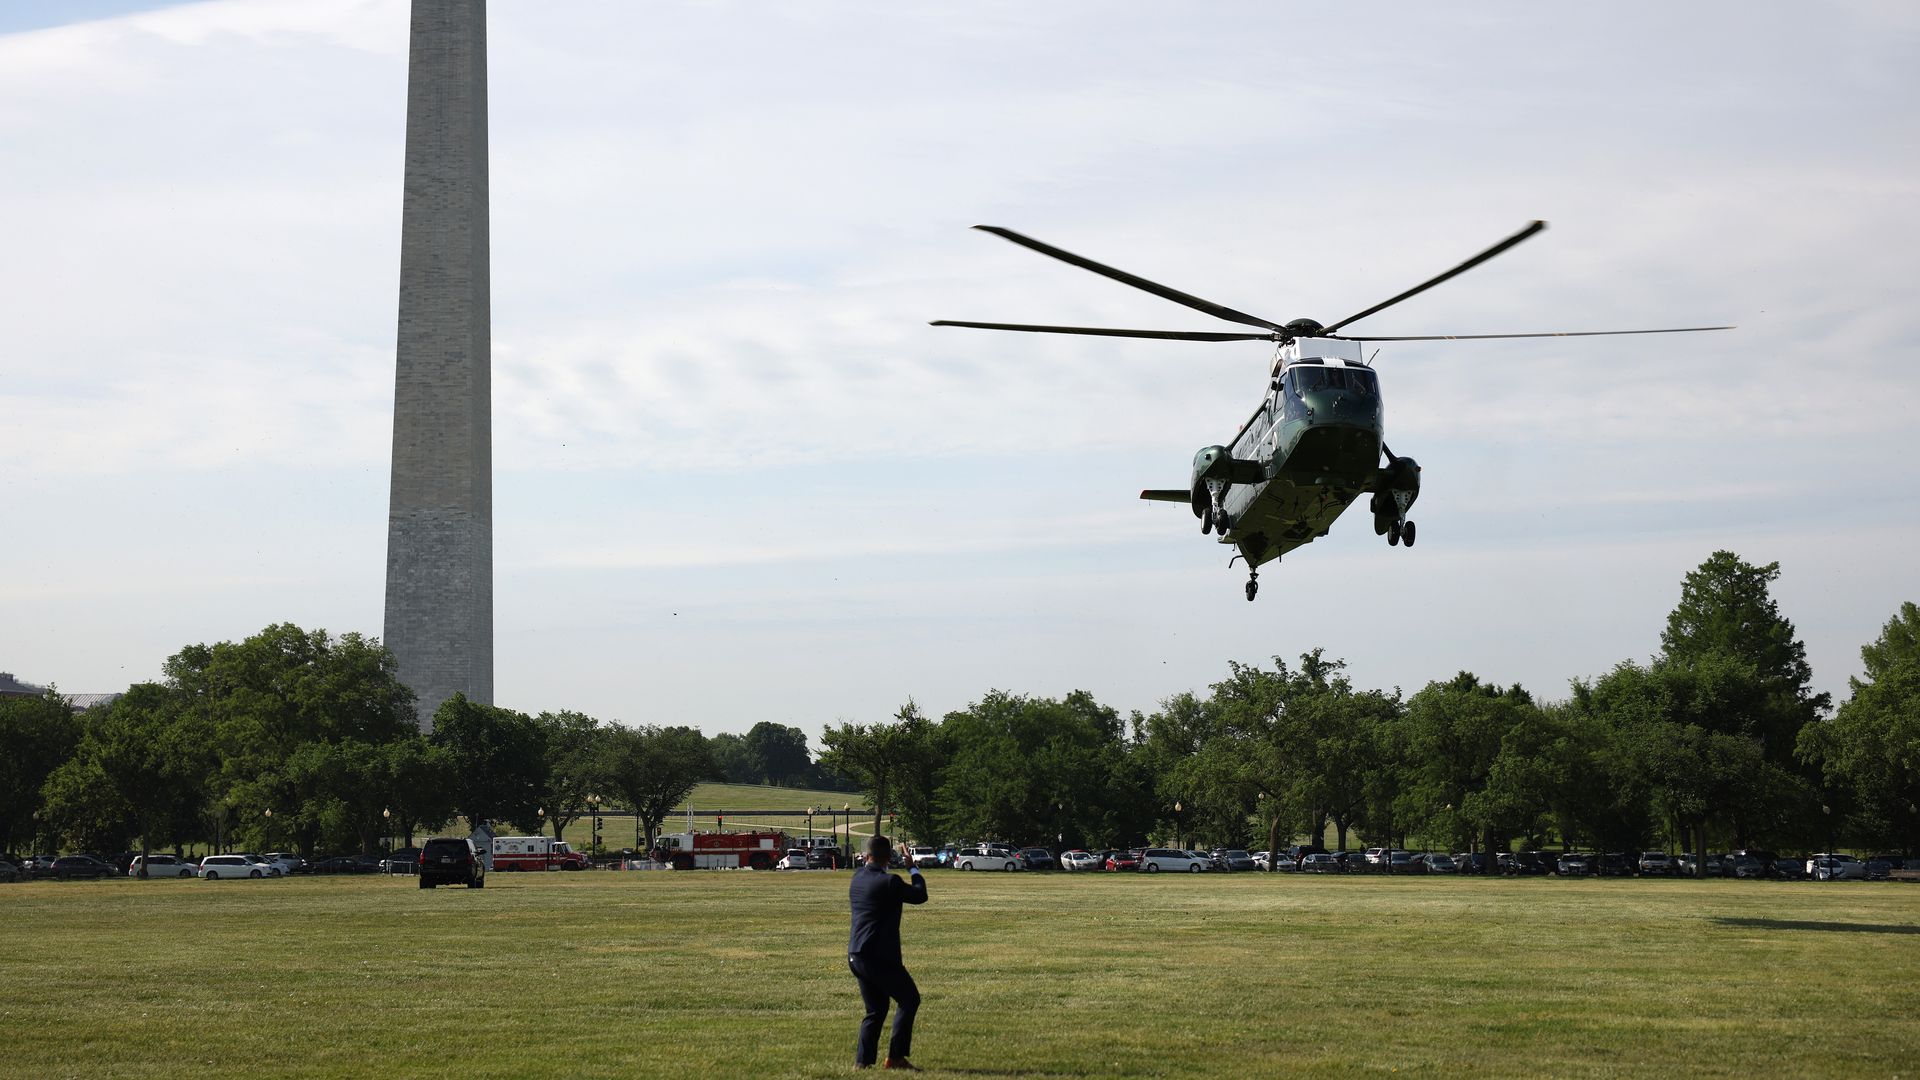 A ground crew member is seen bracing against the rotor-wash of Marine One as it lands on the Ellipse.